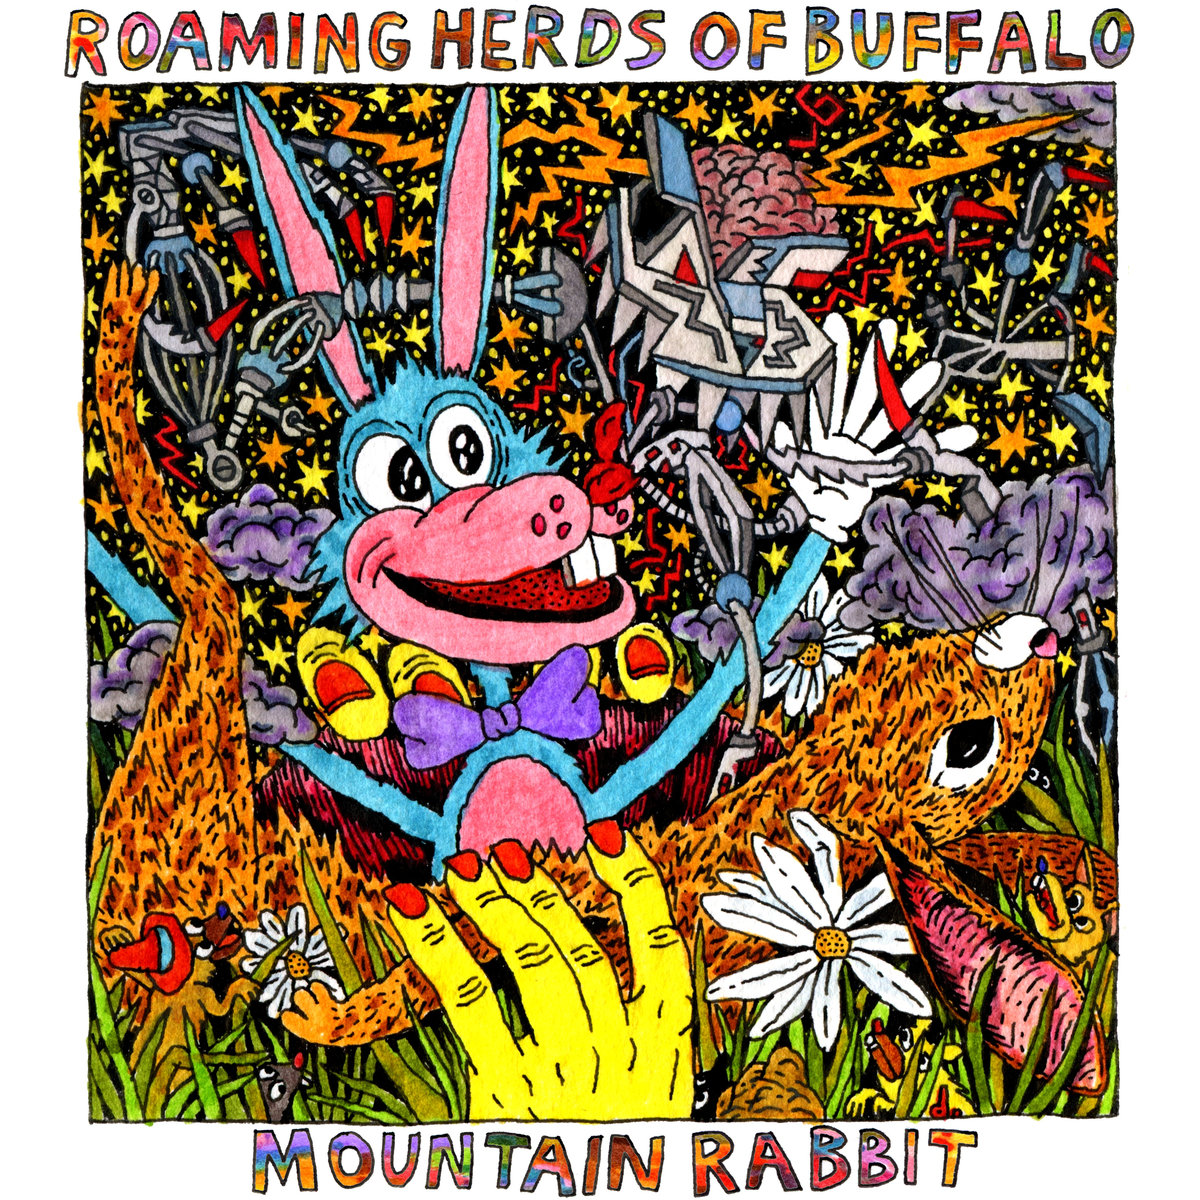 A vibrant, busy image centered on a cartoon, anthropomorphic rabbit bursting out of a more realistically drawn rabbit’s chest.